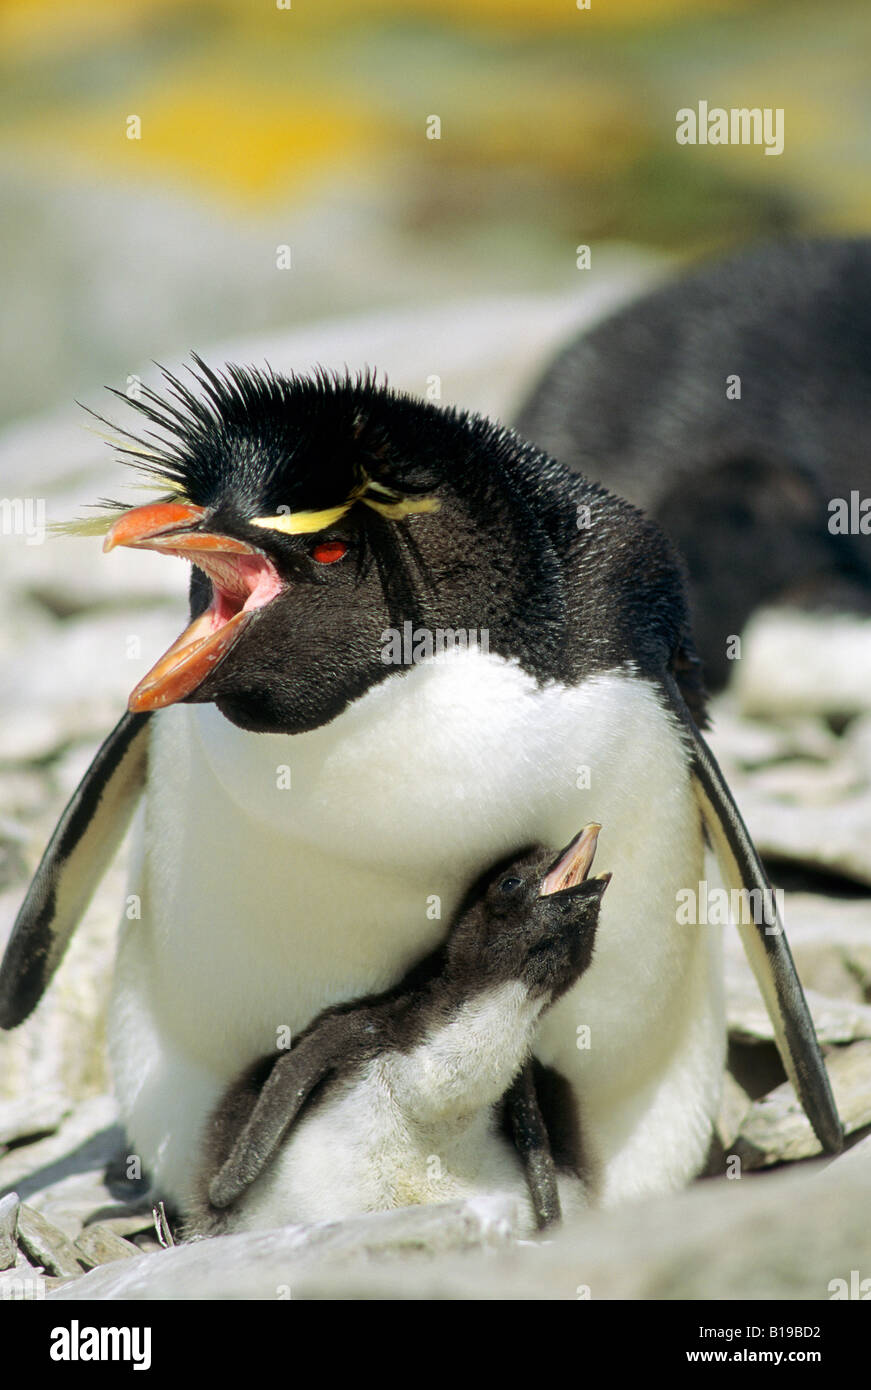 Adult male rockhopper penguin (Eudyptes chrysocome) defending a newly hatched chick, Falkland Islands, southern Atlantic Ocean Stock Photo